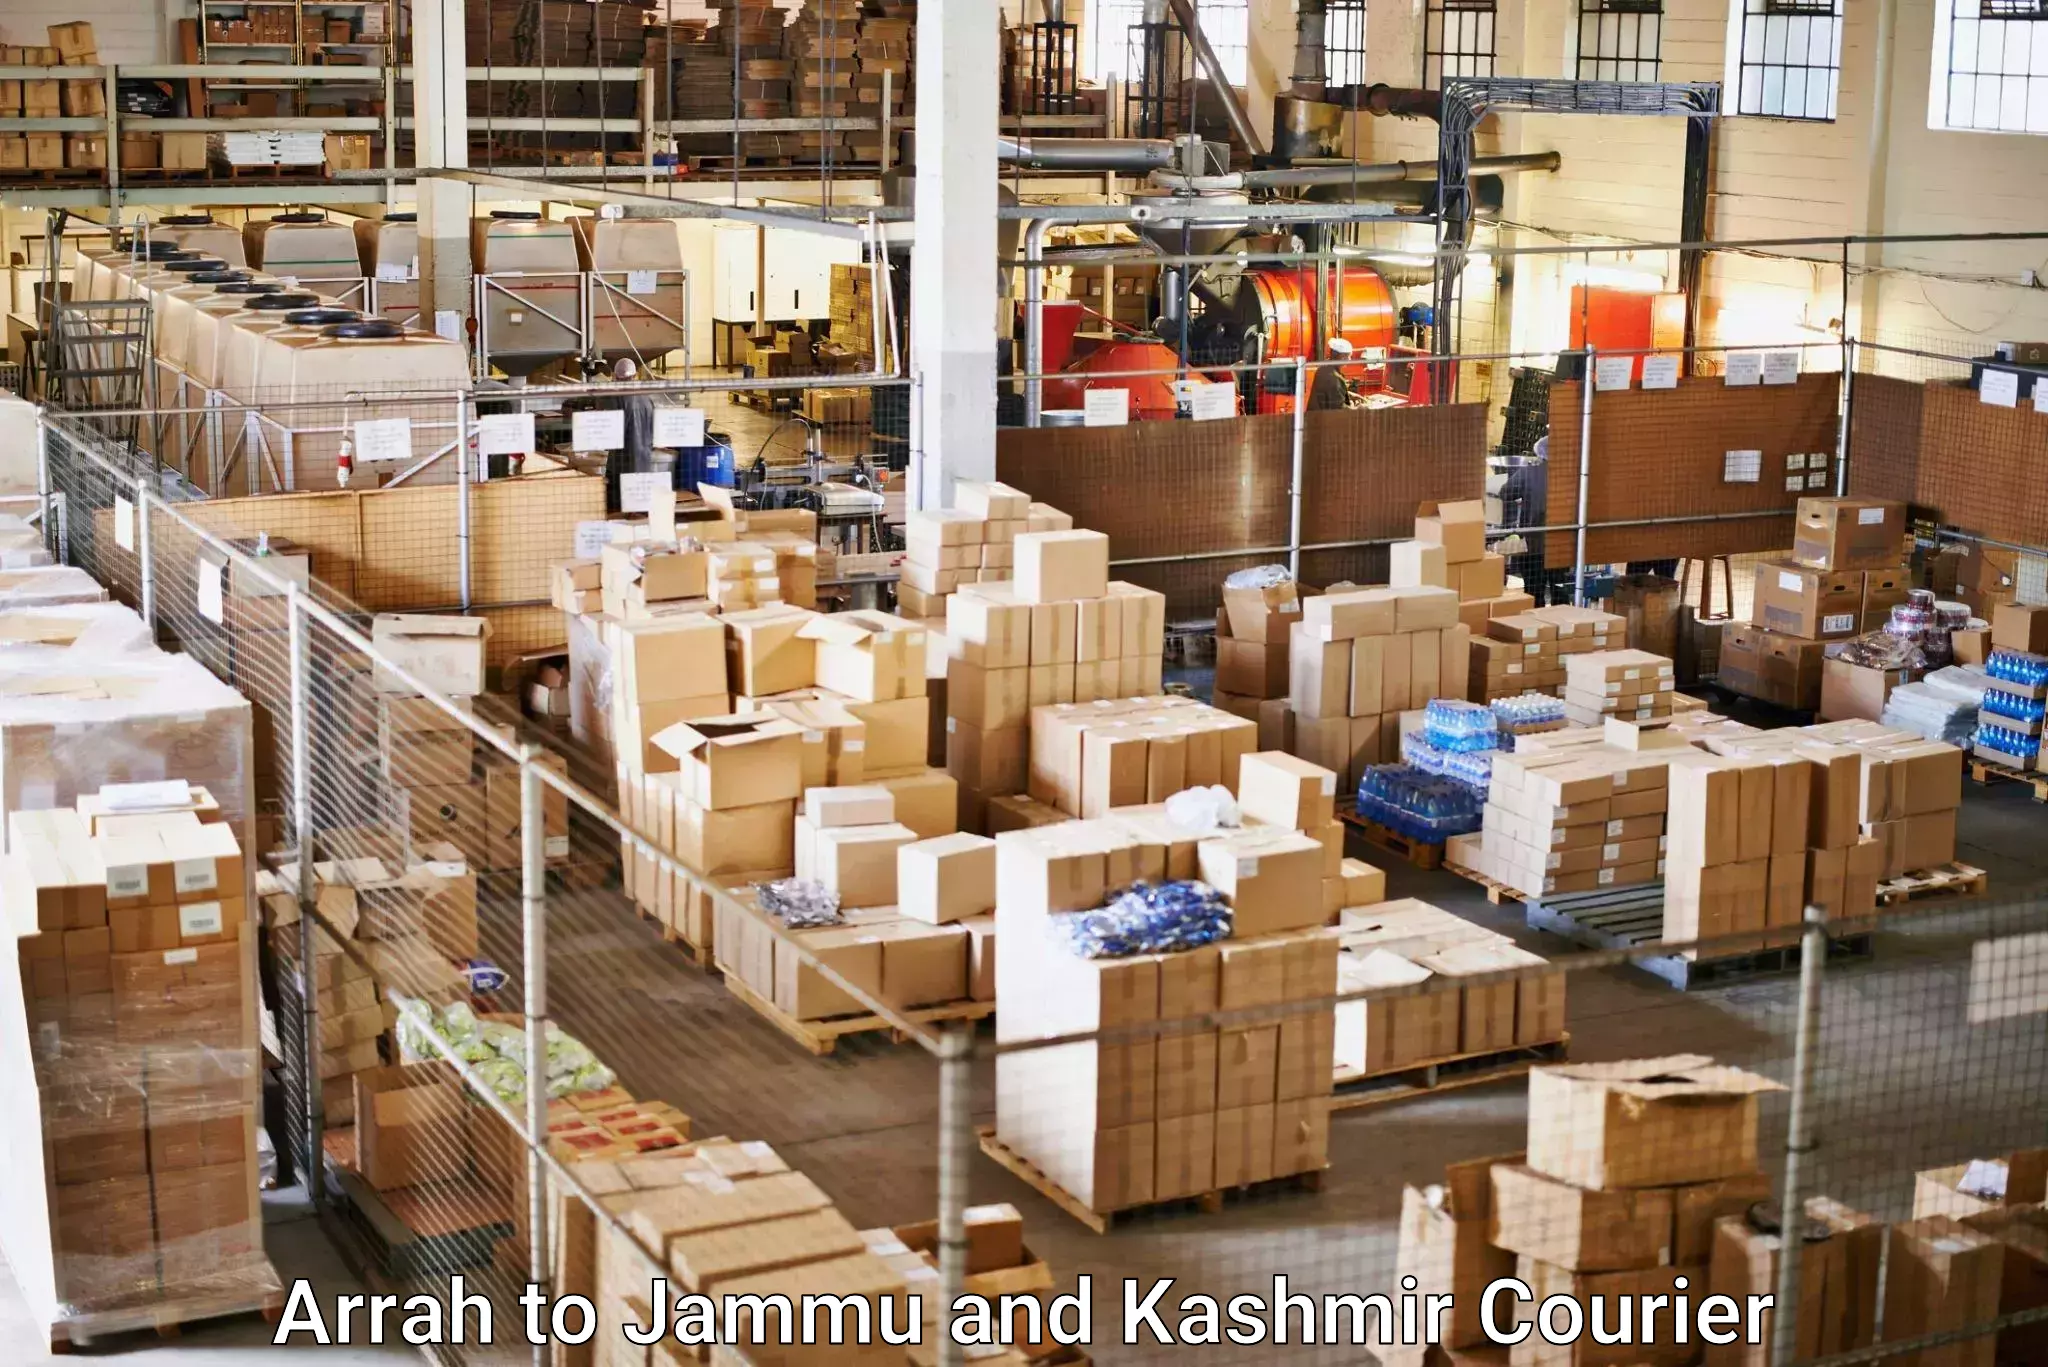 Nationwide delivery network in Arrah to Jammu and Kashmir